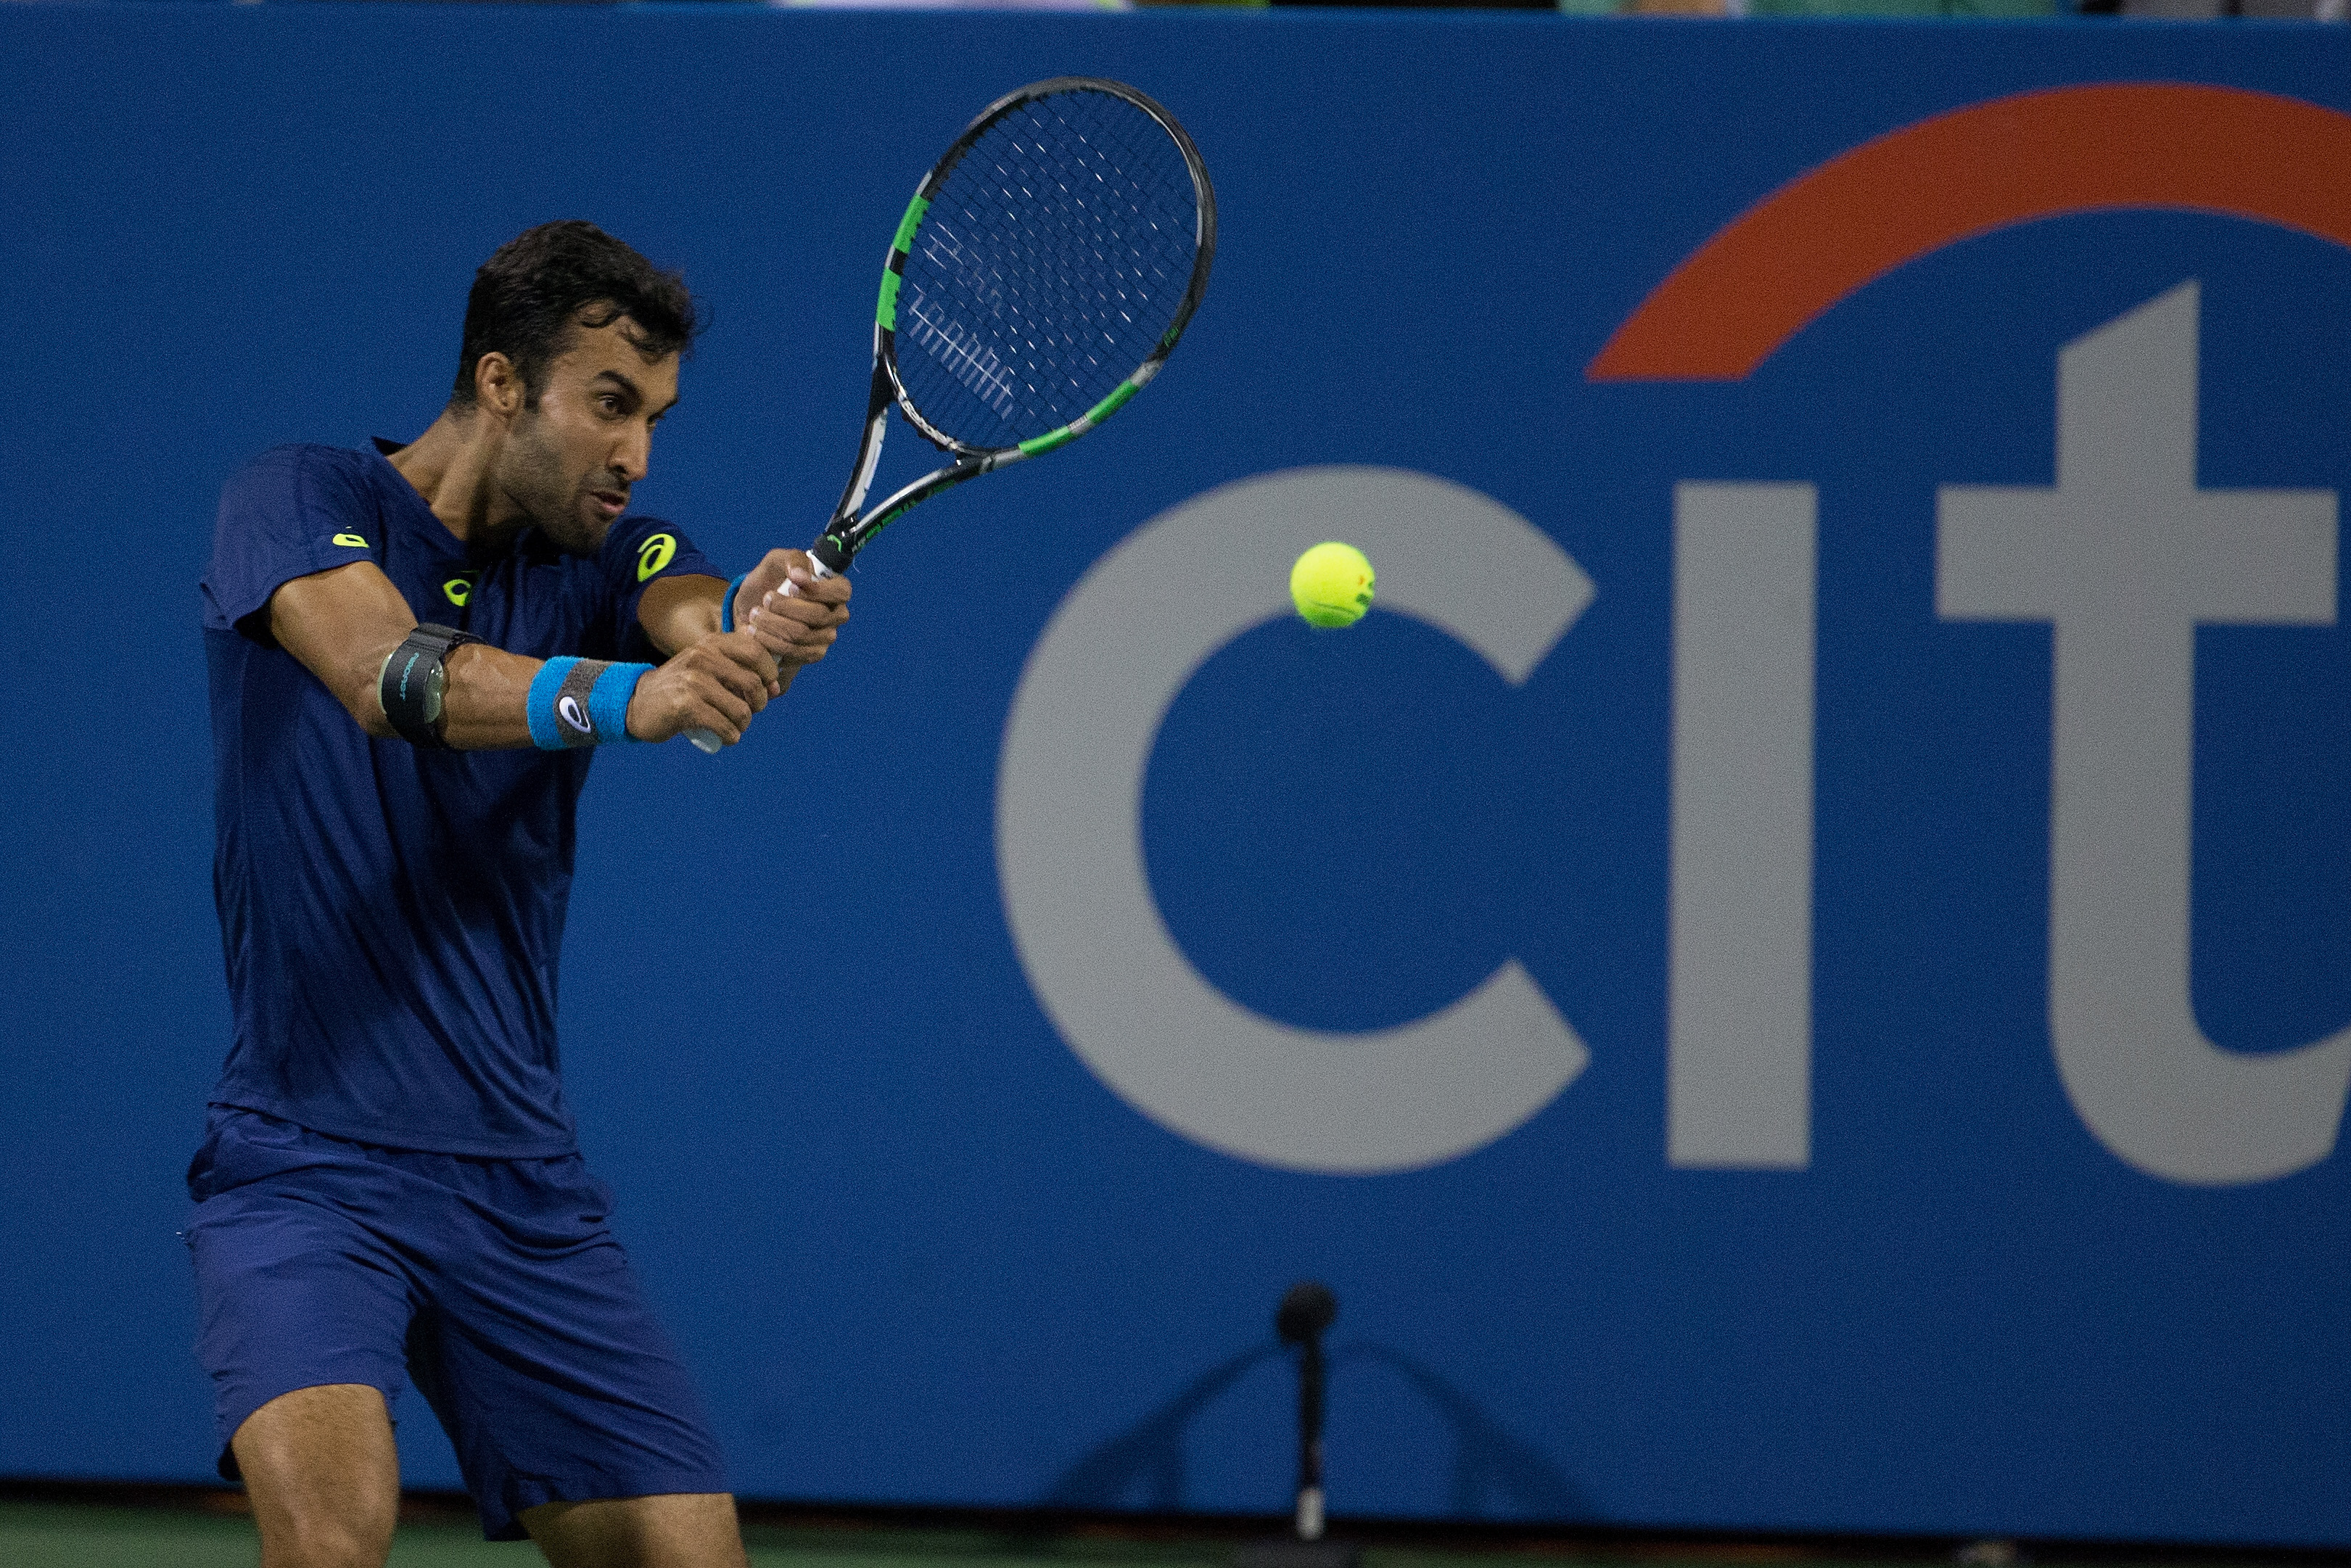 I have nothing to lose, only so much more to gain, claims Yuki Bhambri ahead of Sam Querrey clash